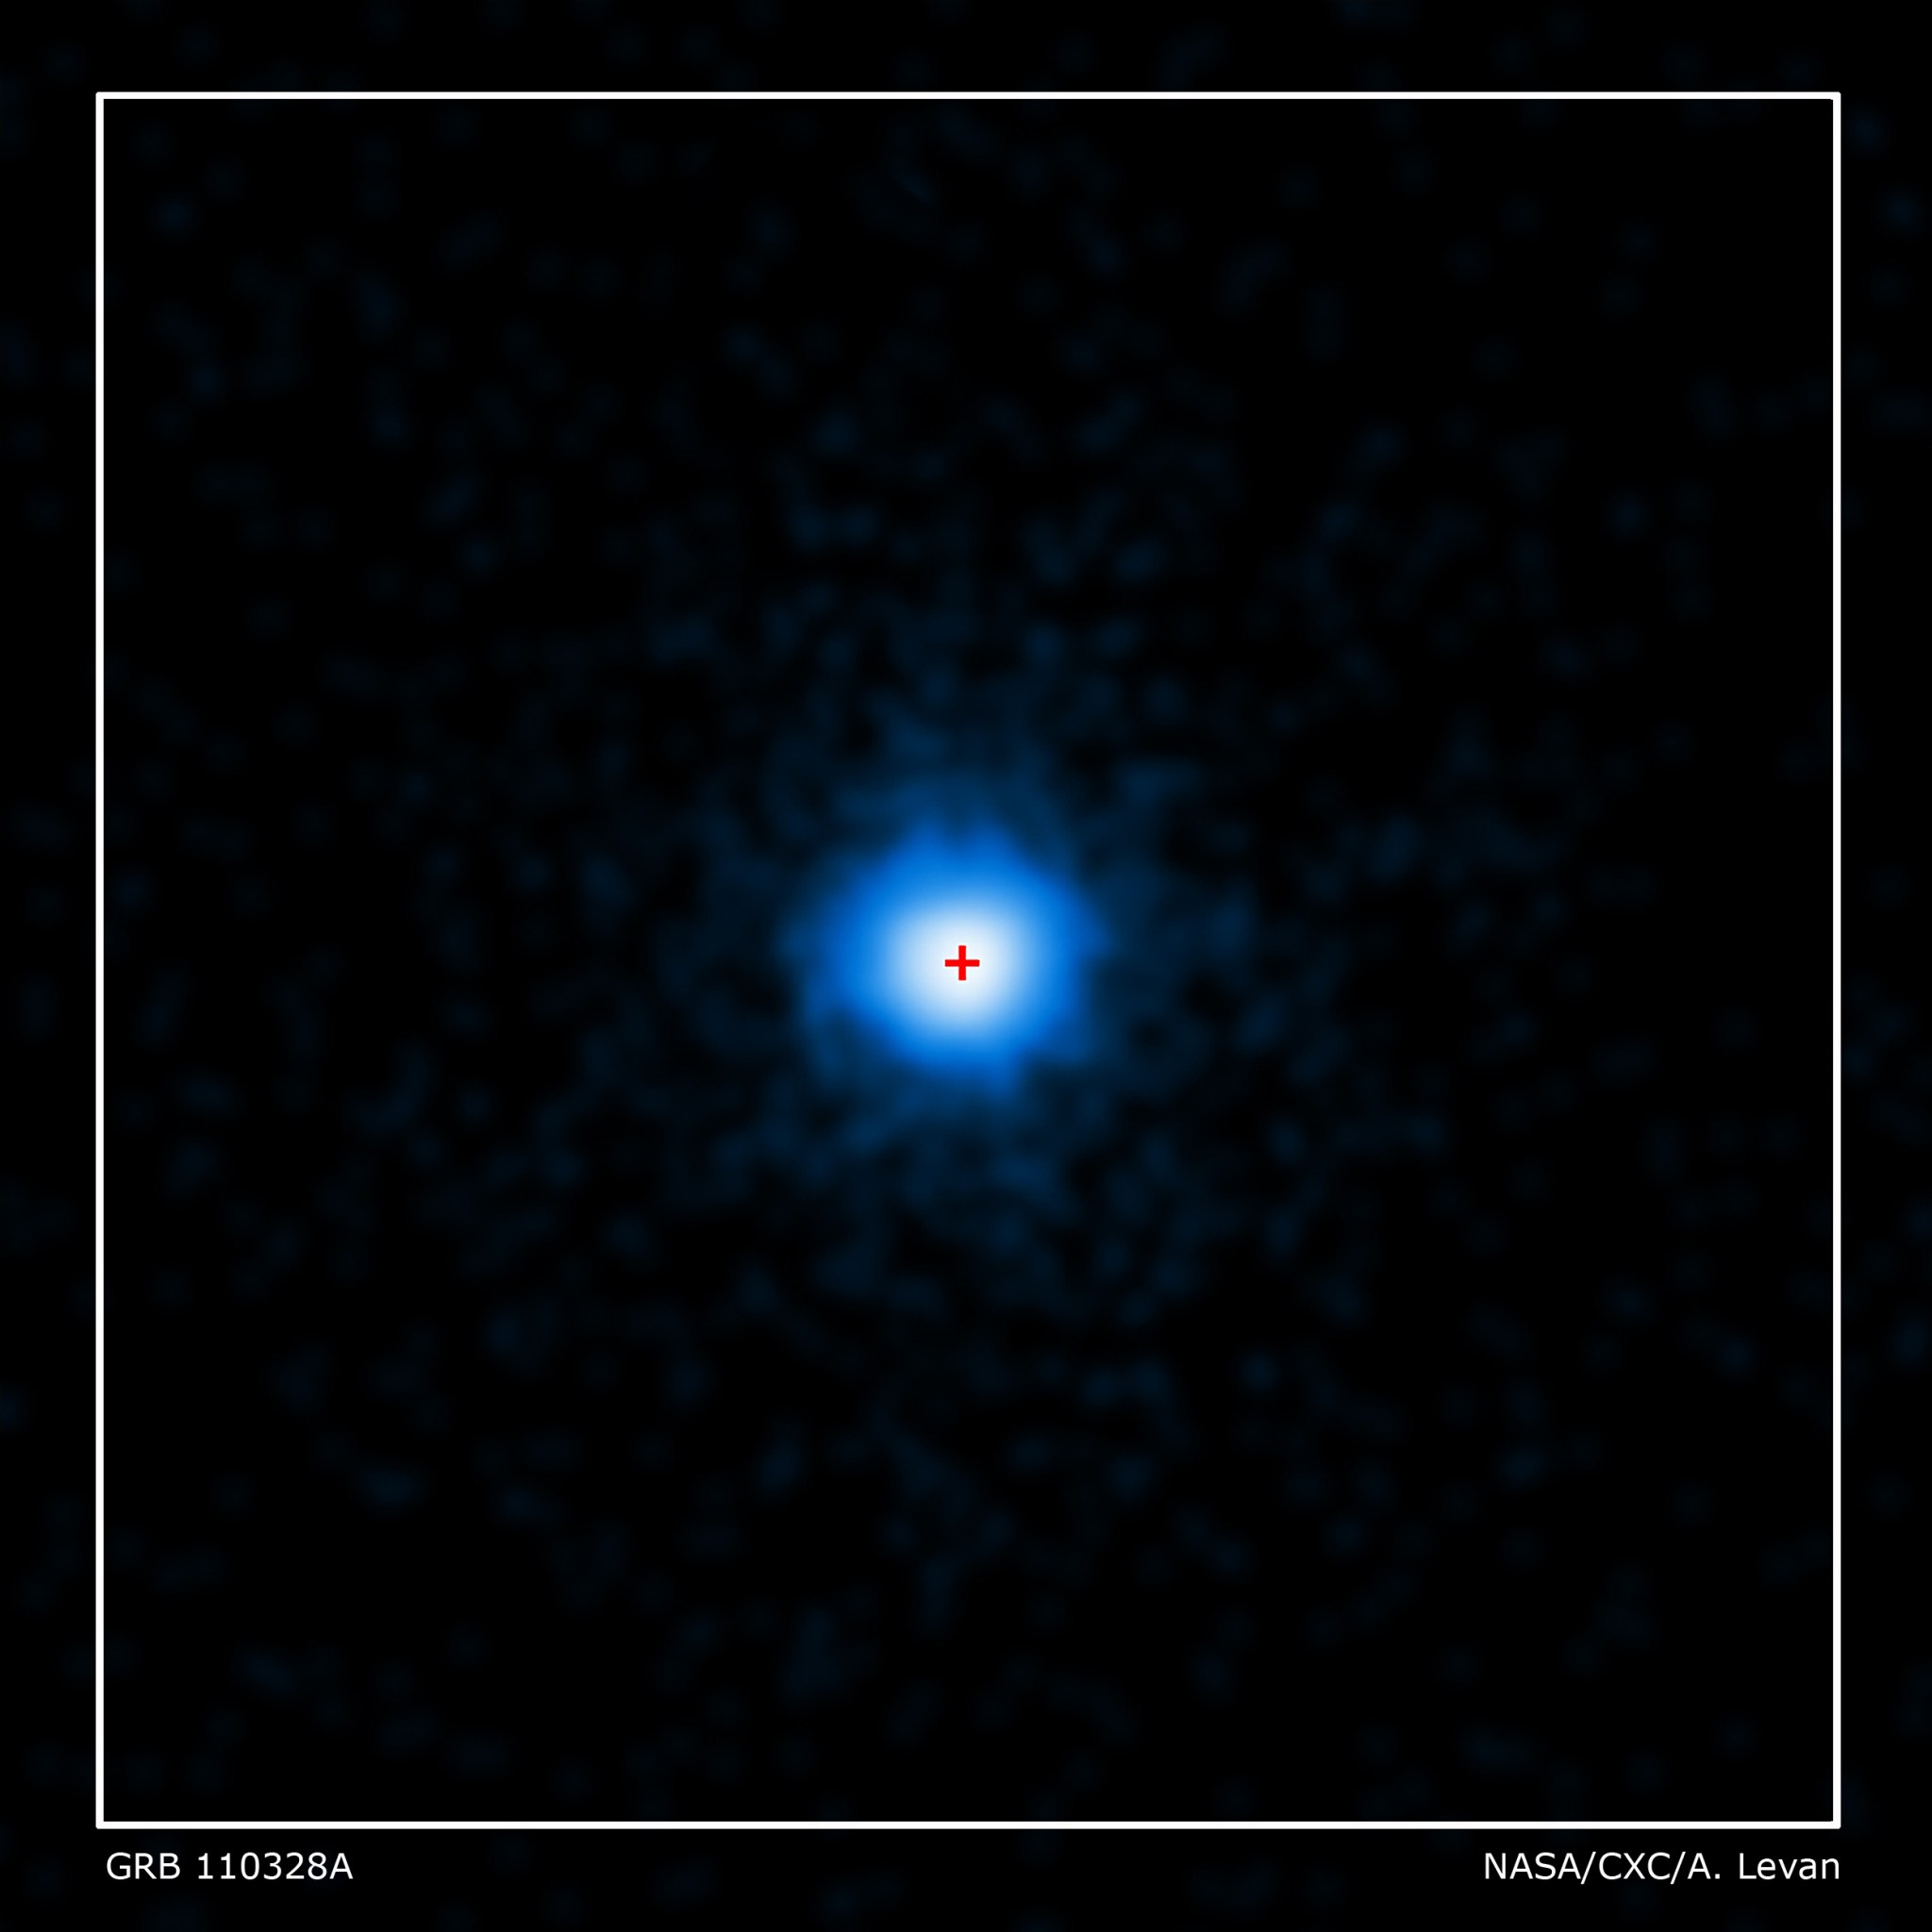 Chandra image of GRB110328A's X-ray afterglow